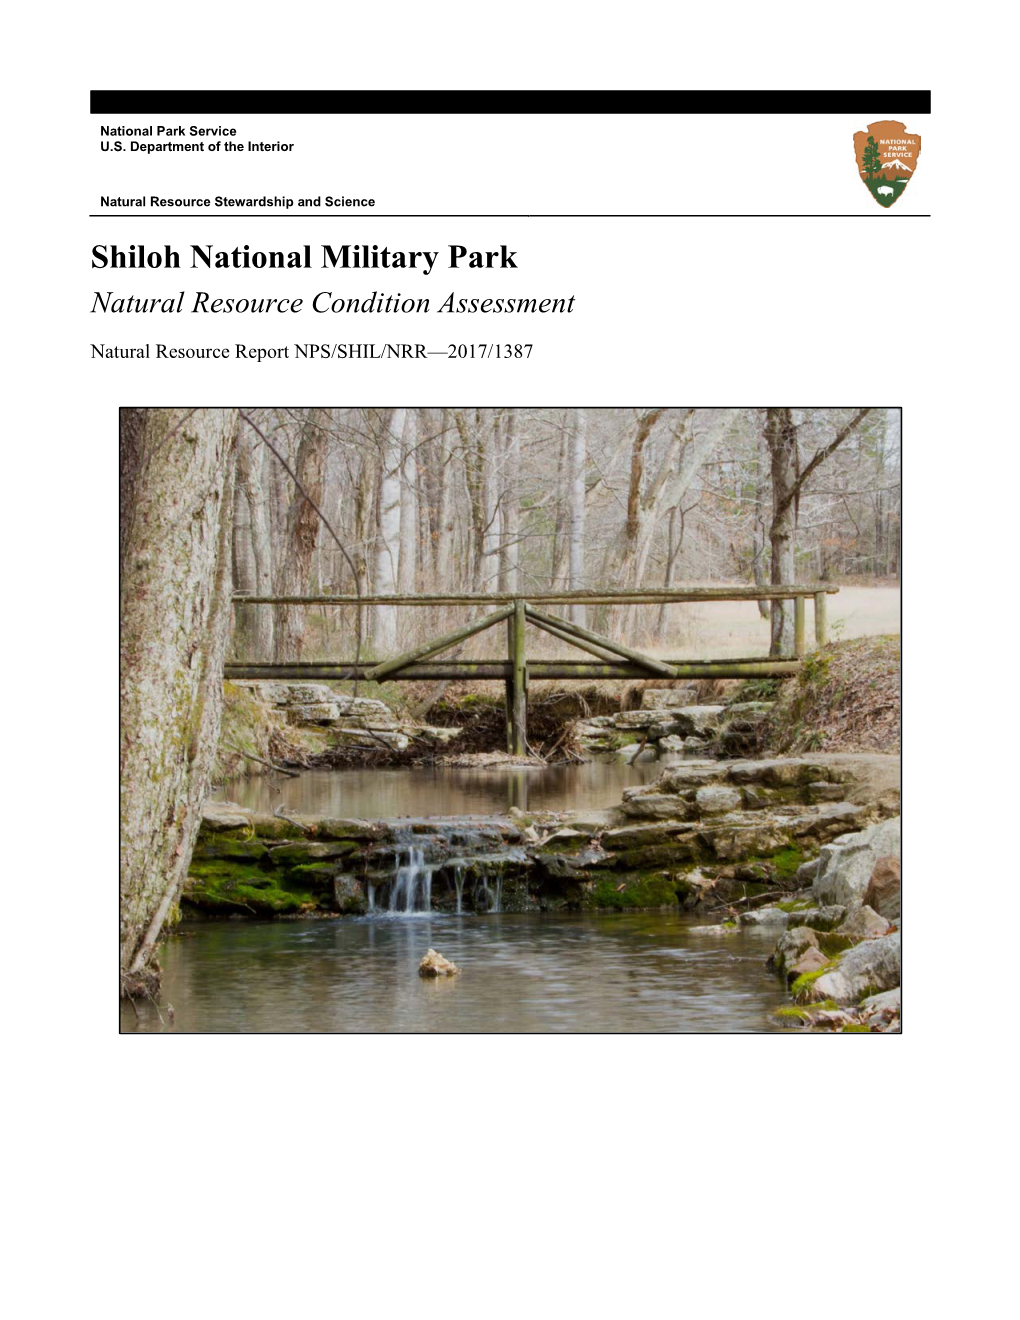 Shiloh National Military Park Natural Resource Condition Assessment